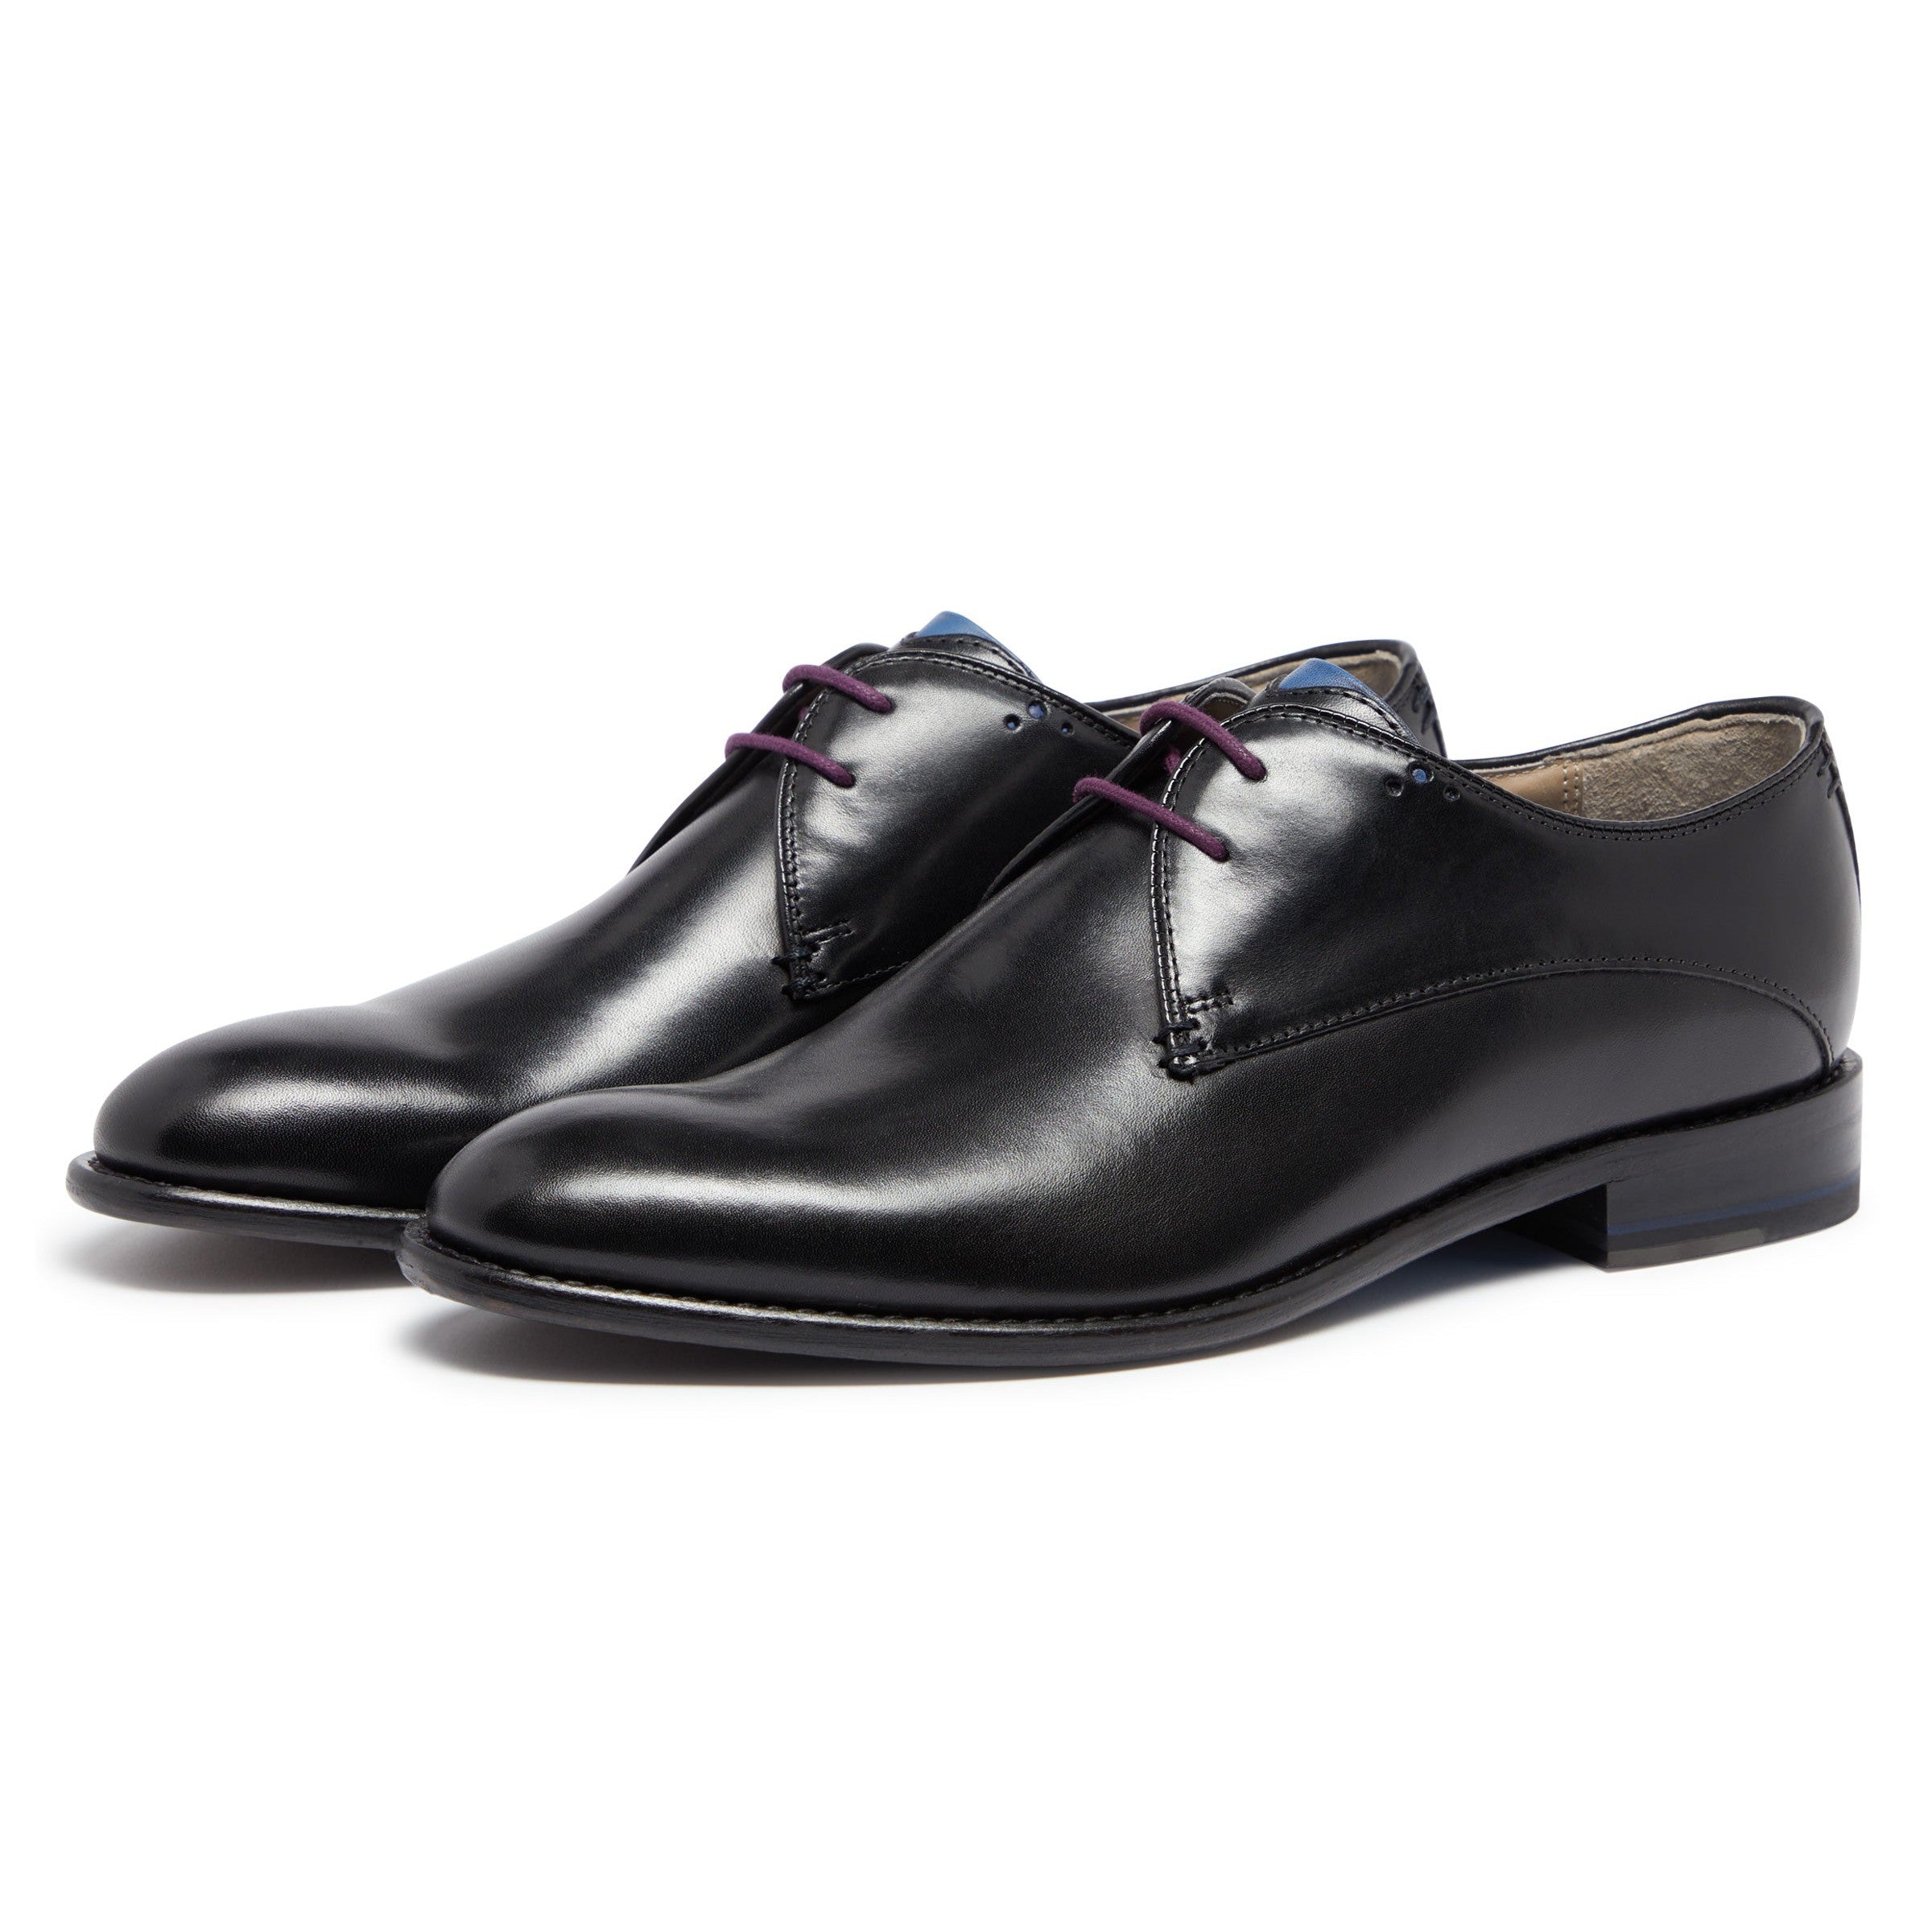 Oliver Sweeney Knole Calf Leather Shoes - Black - Size 10